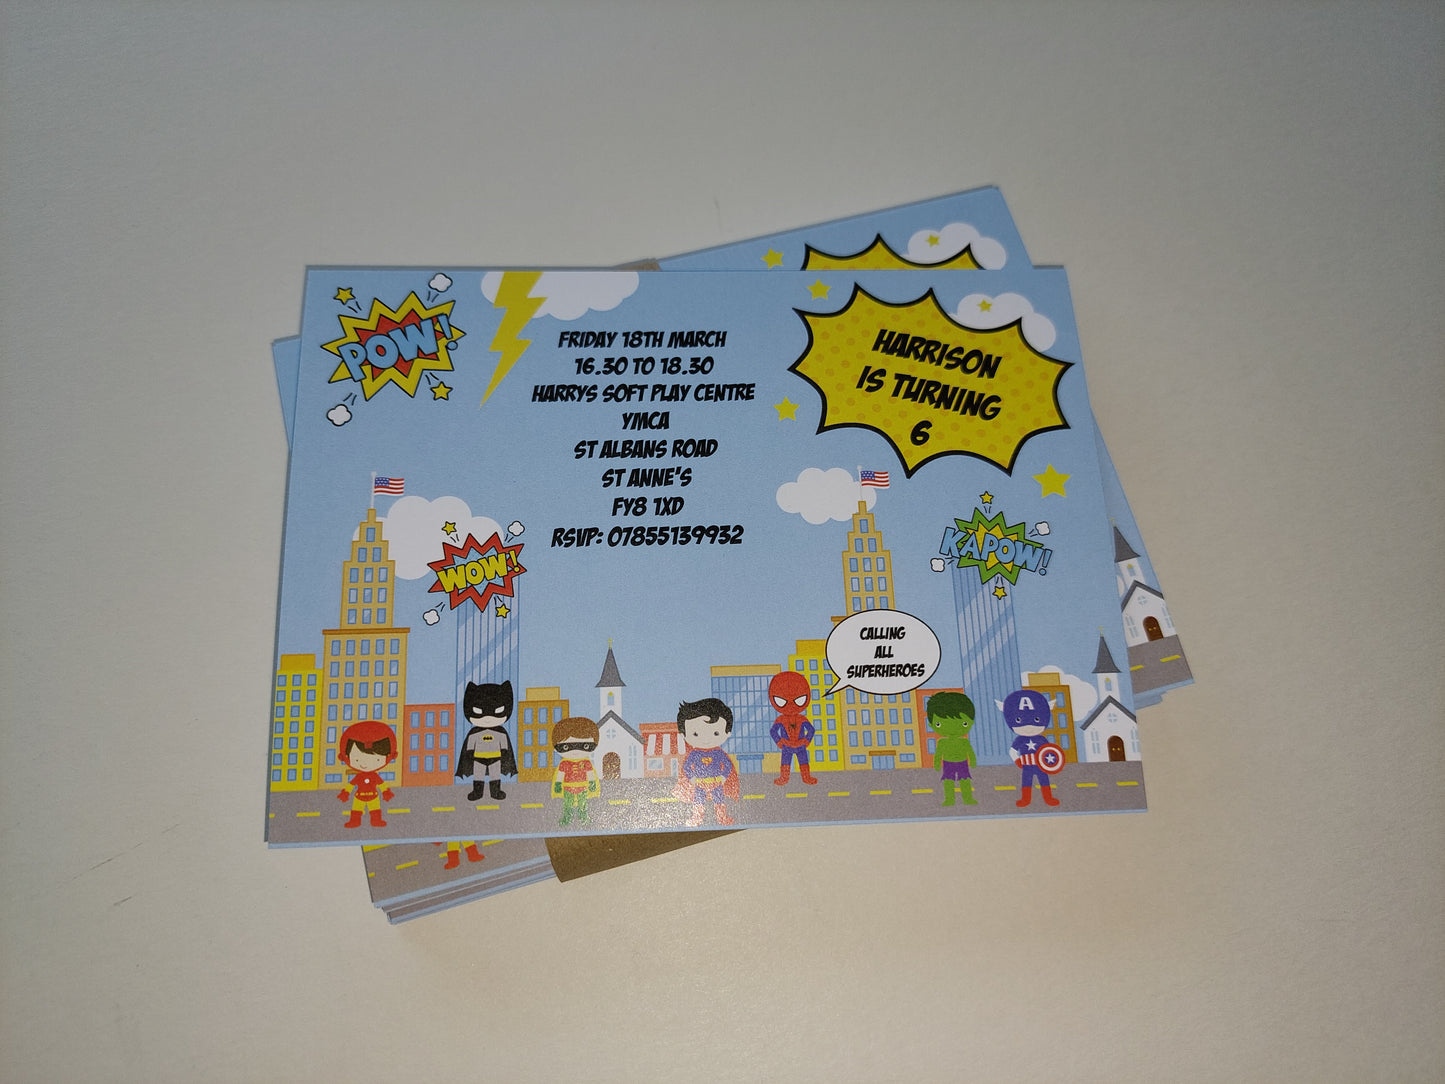 Rectangle Stickers | Party Stickers | Superhero Birthday Stickers | Party Bag Stickers